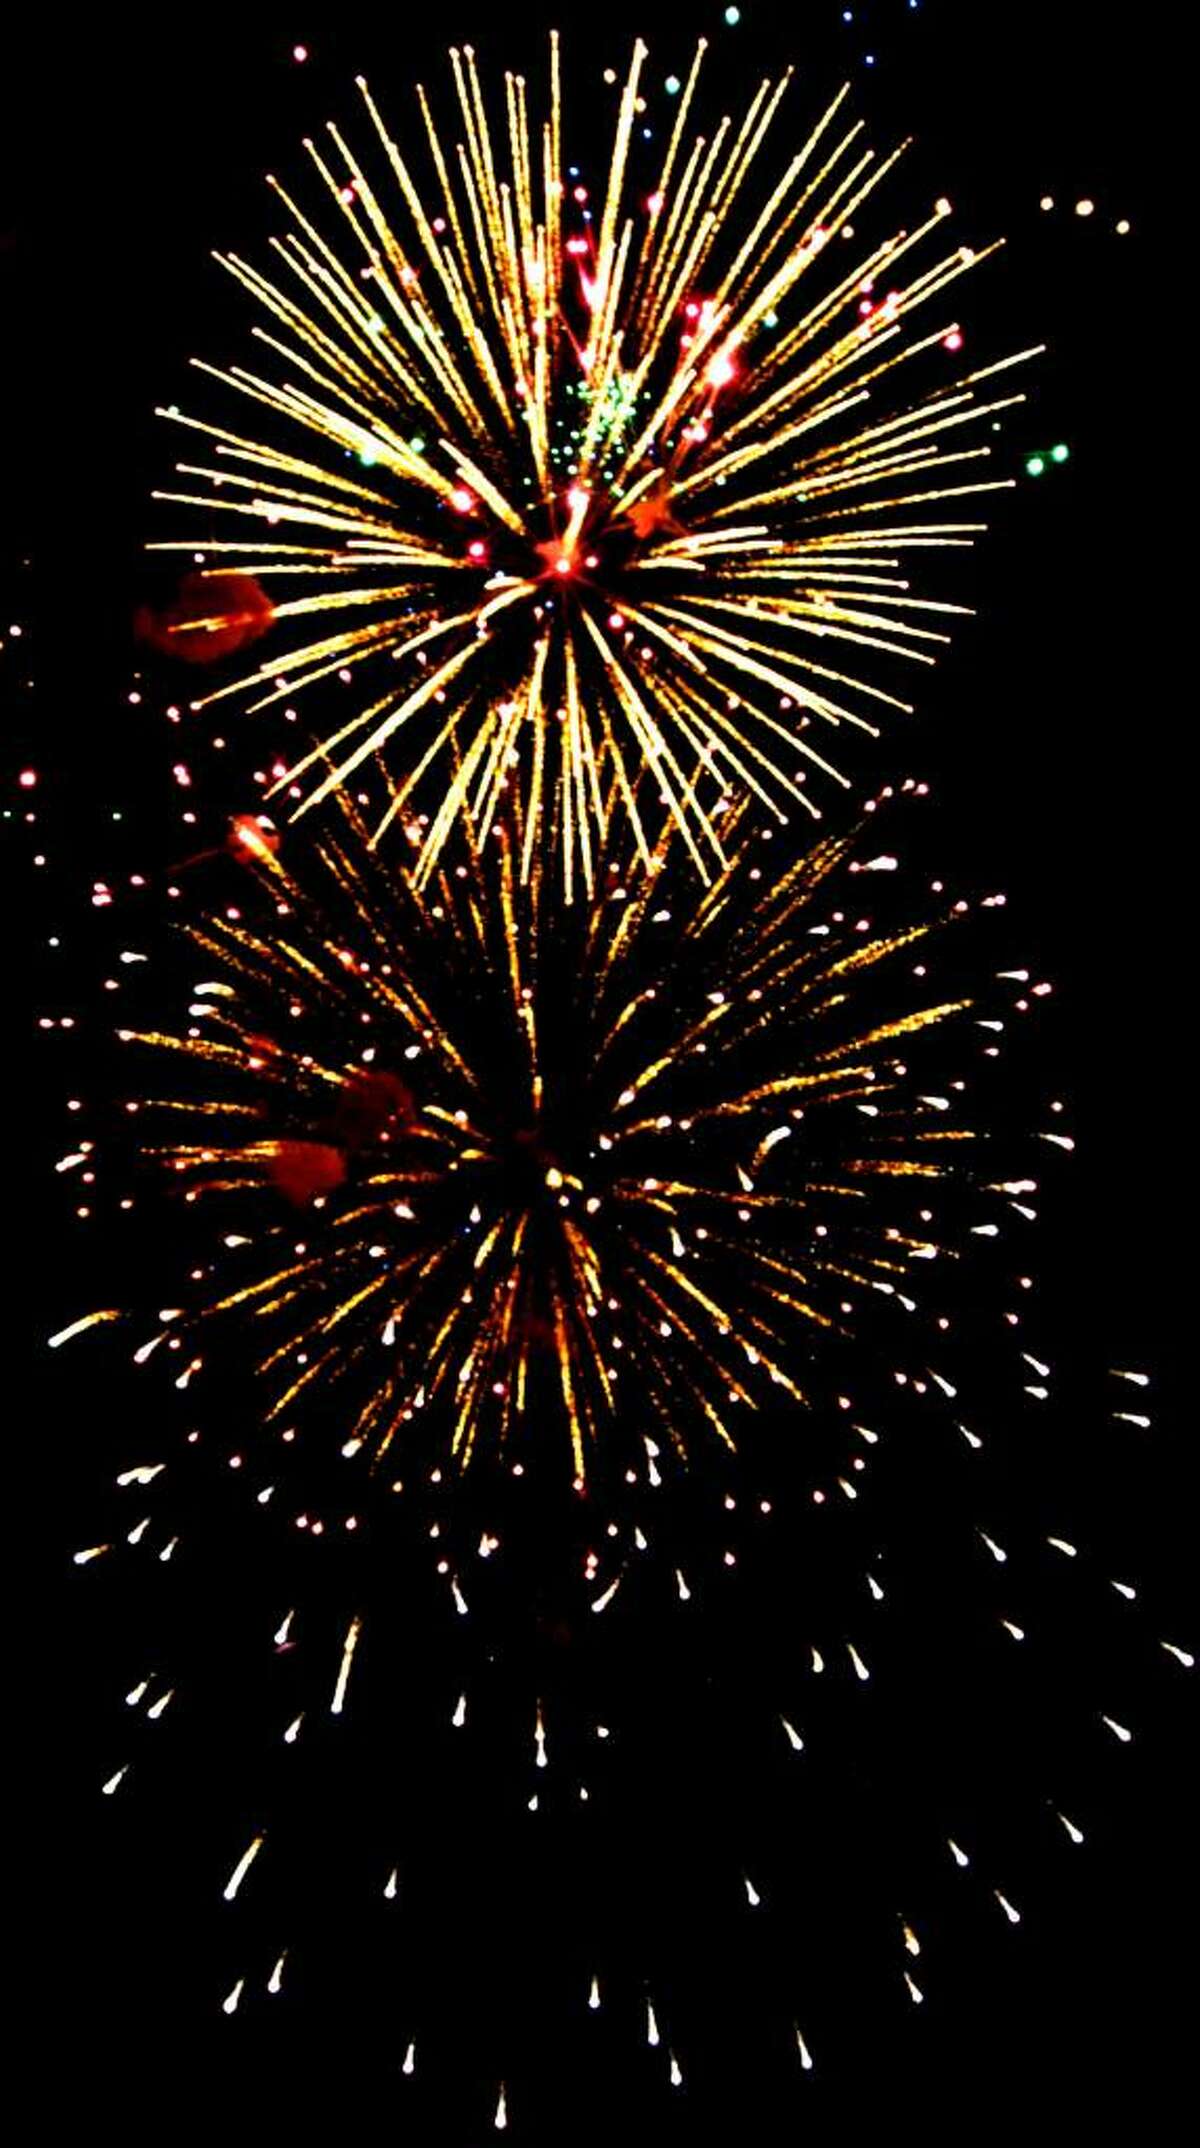 SPECTRUM/The skies over the Shepaug Valley were brightened Sunday during the town of Washington's annual Fourth of July fireworks show on the campus of Shepaug Valley High School.